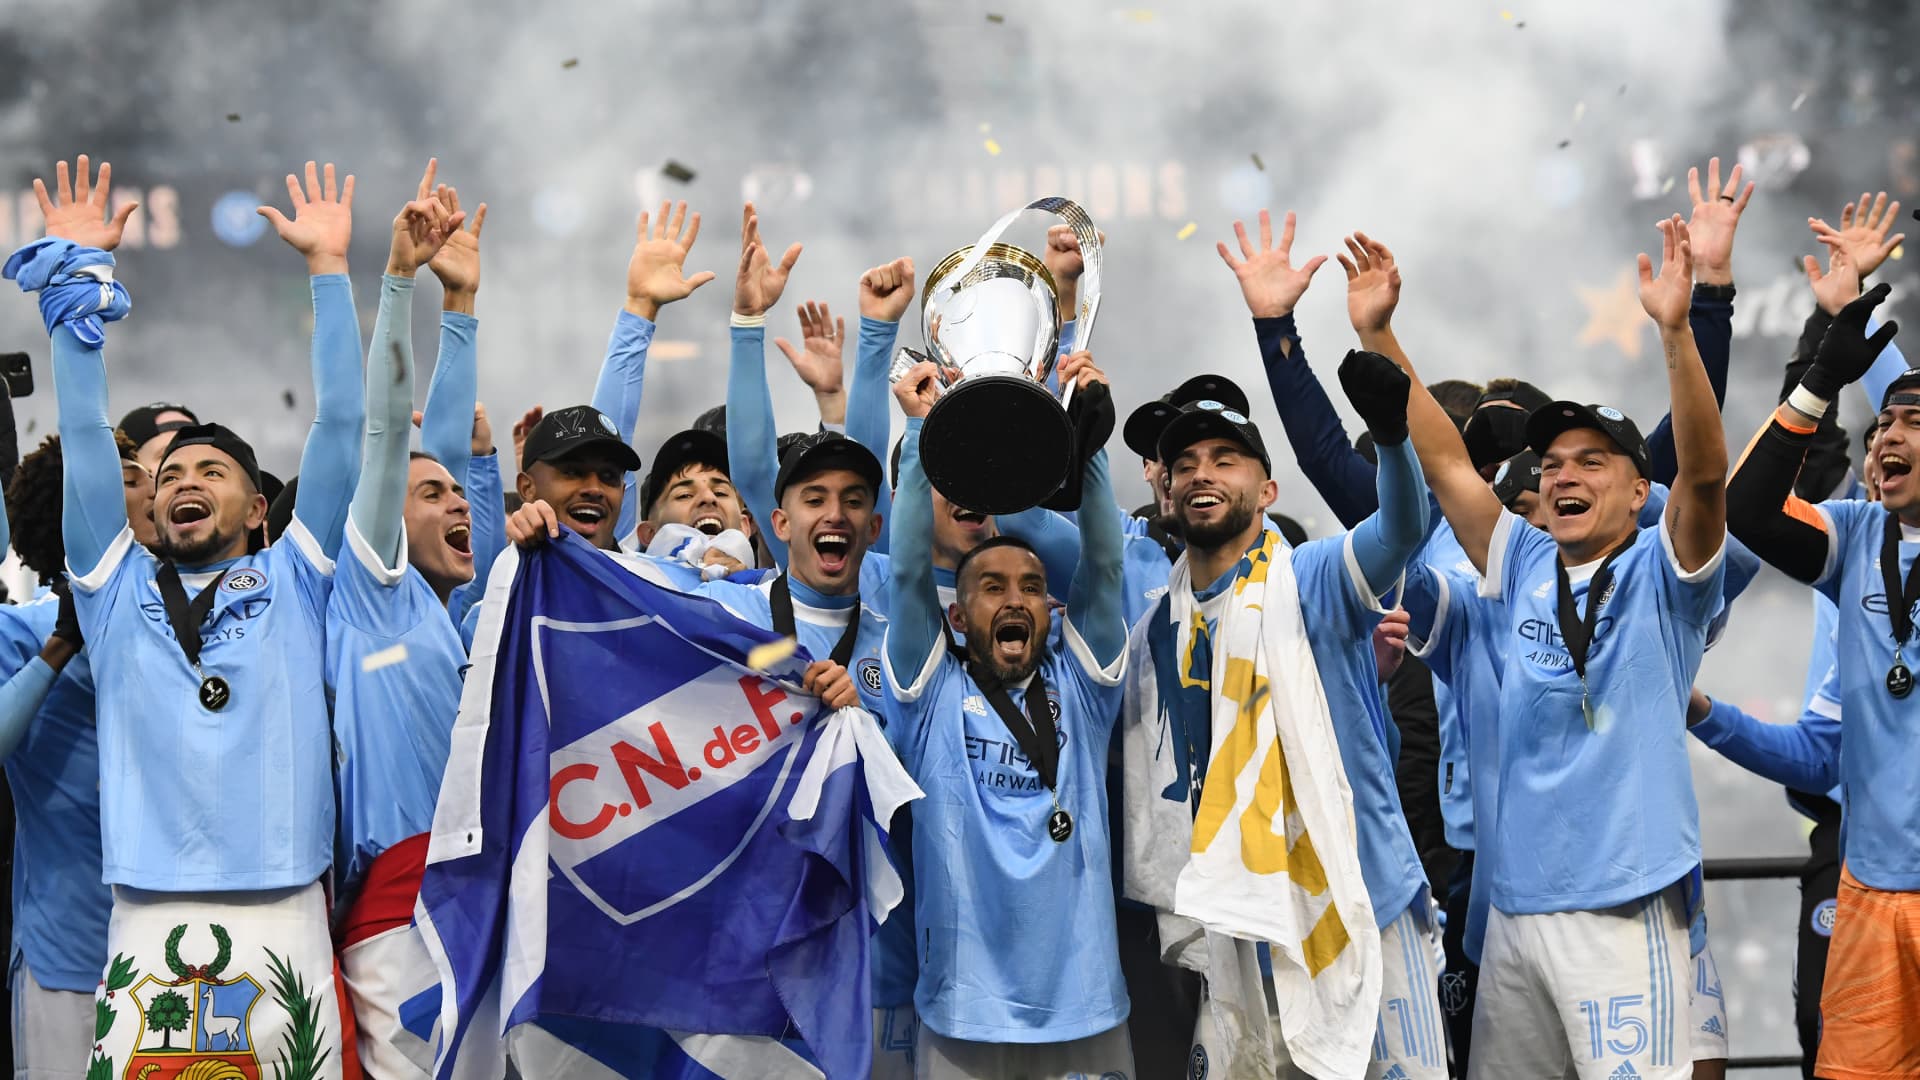 The New York City FC celebrate winning the 2021 MLS Cup during the MLS Cup Final between the Portland Timbers and New York City FC on December 11, 2021 at Providence Park in Portland, Oregon.